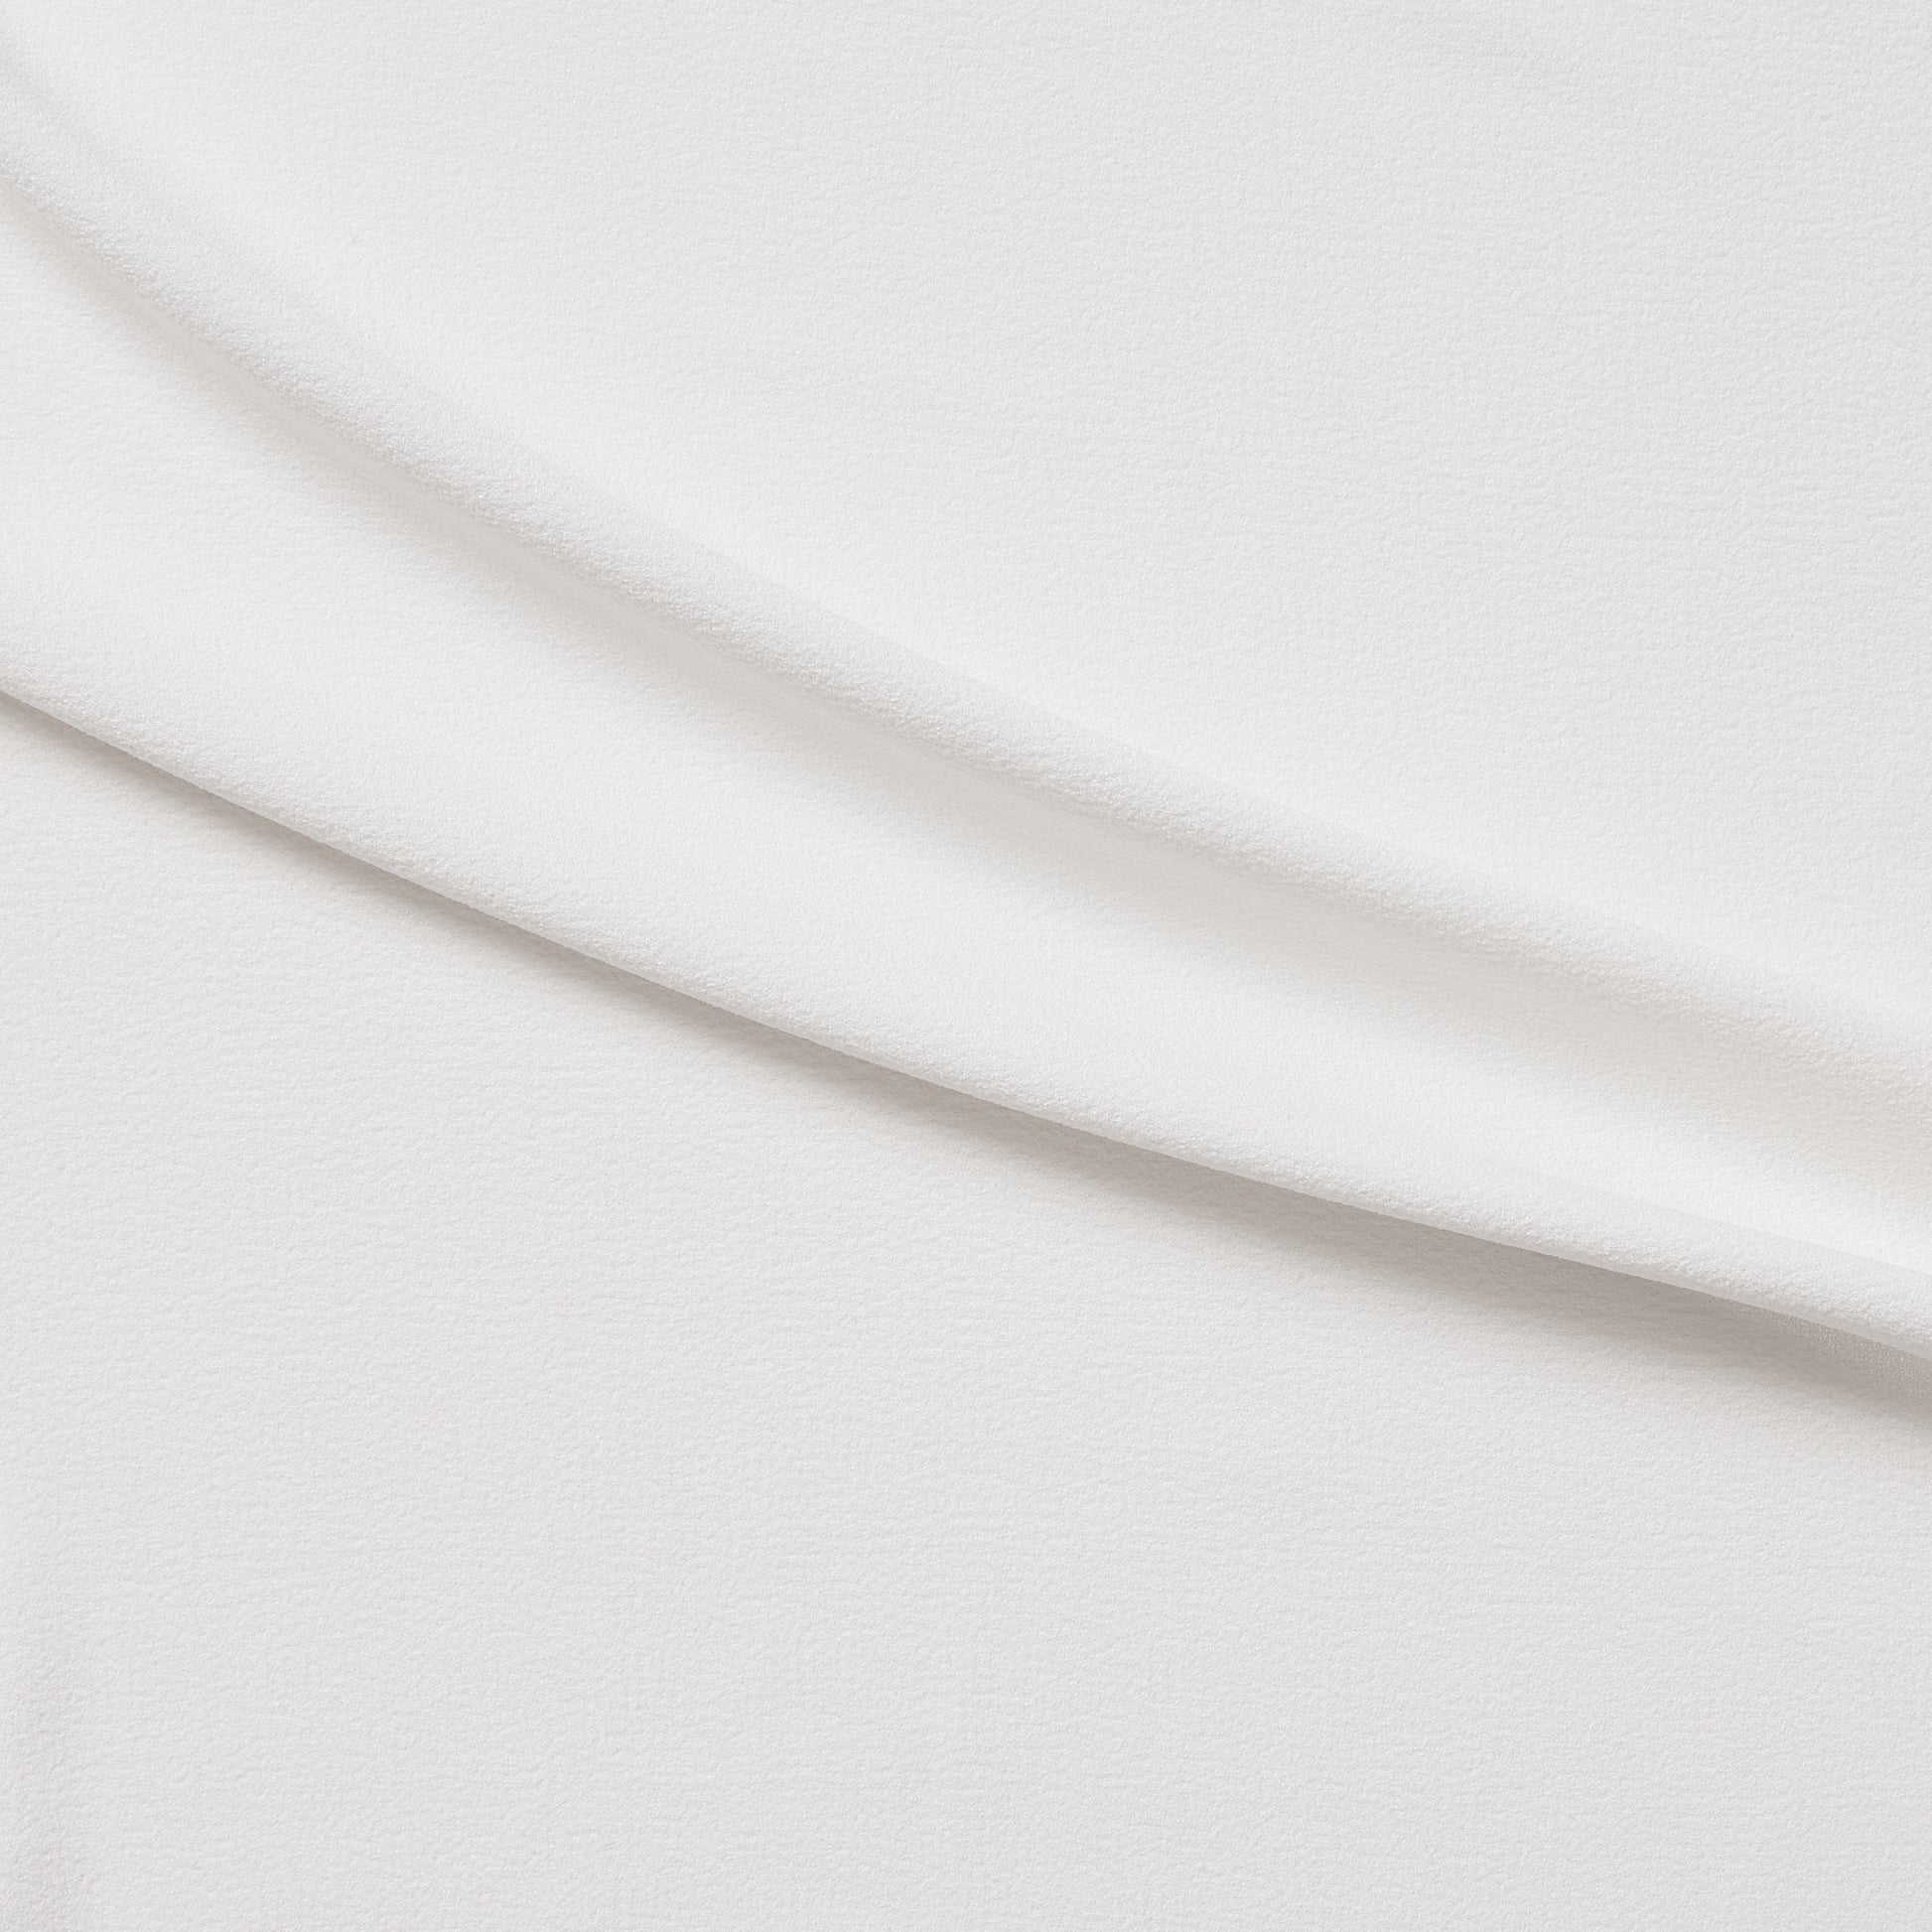 London Crepe presenting the ivory color version with 2 way stretch knit polyester with spandex